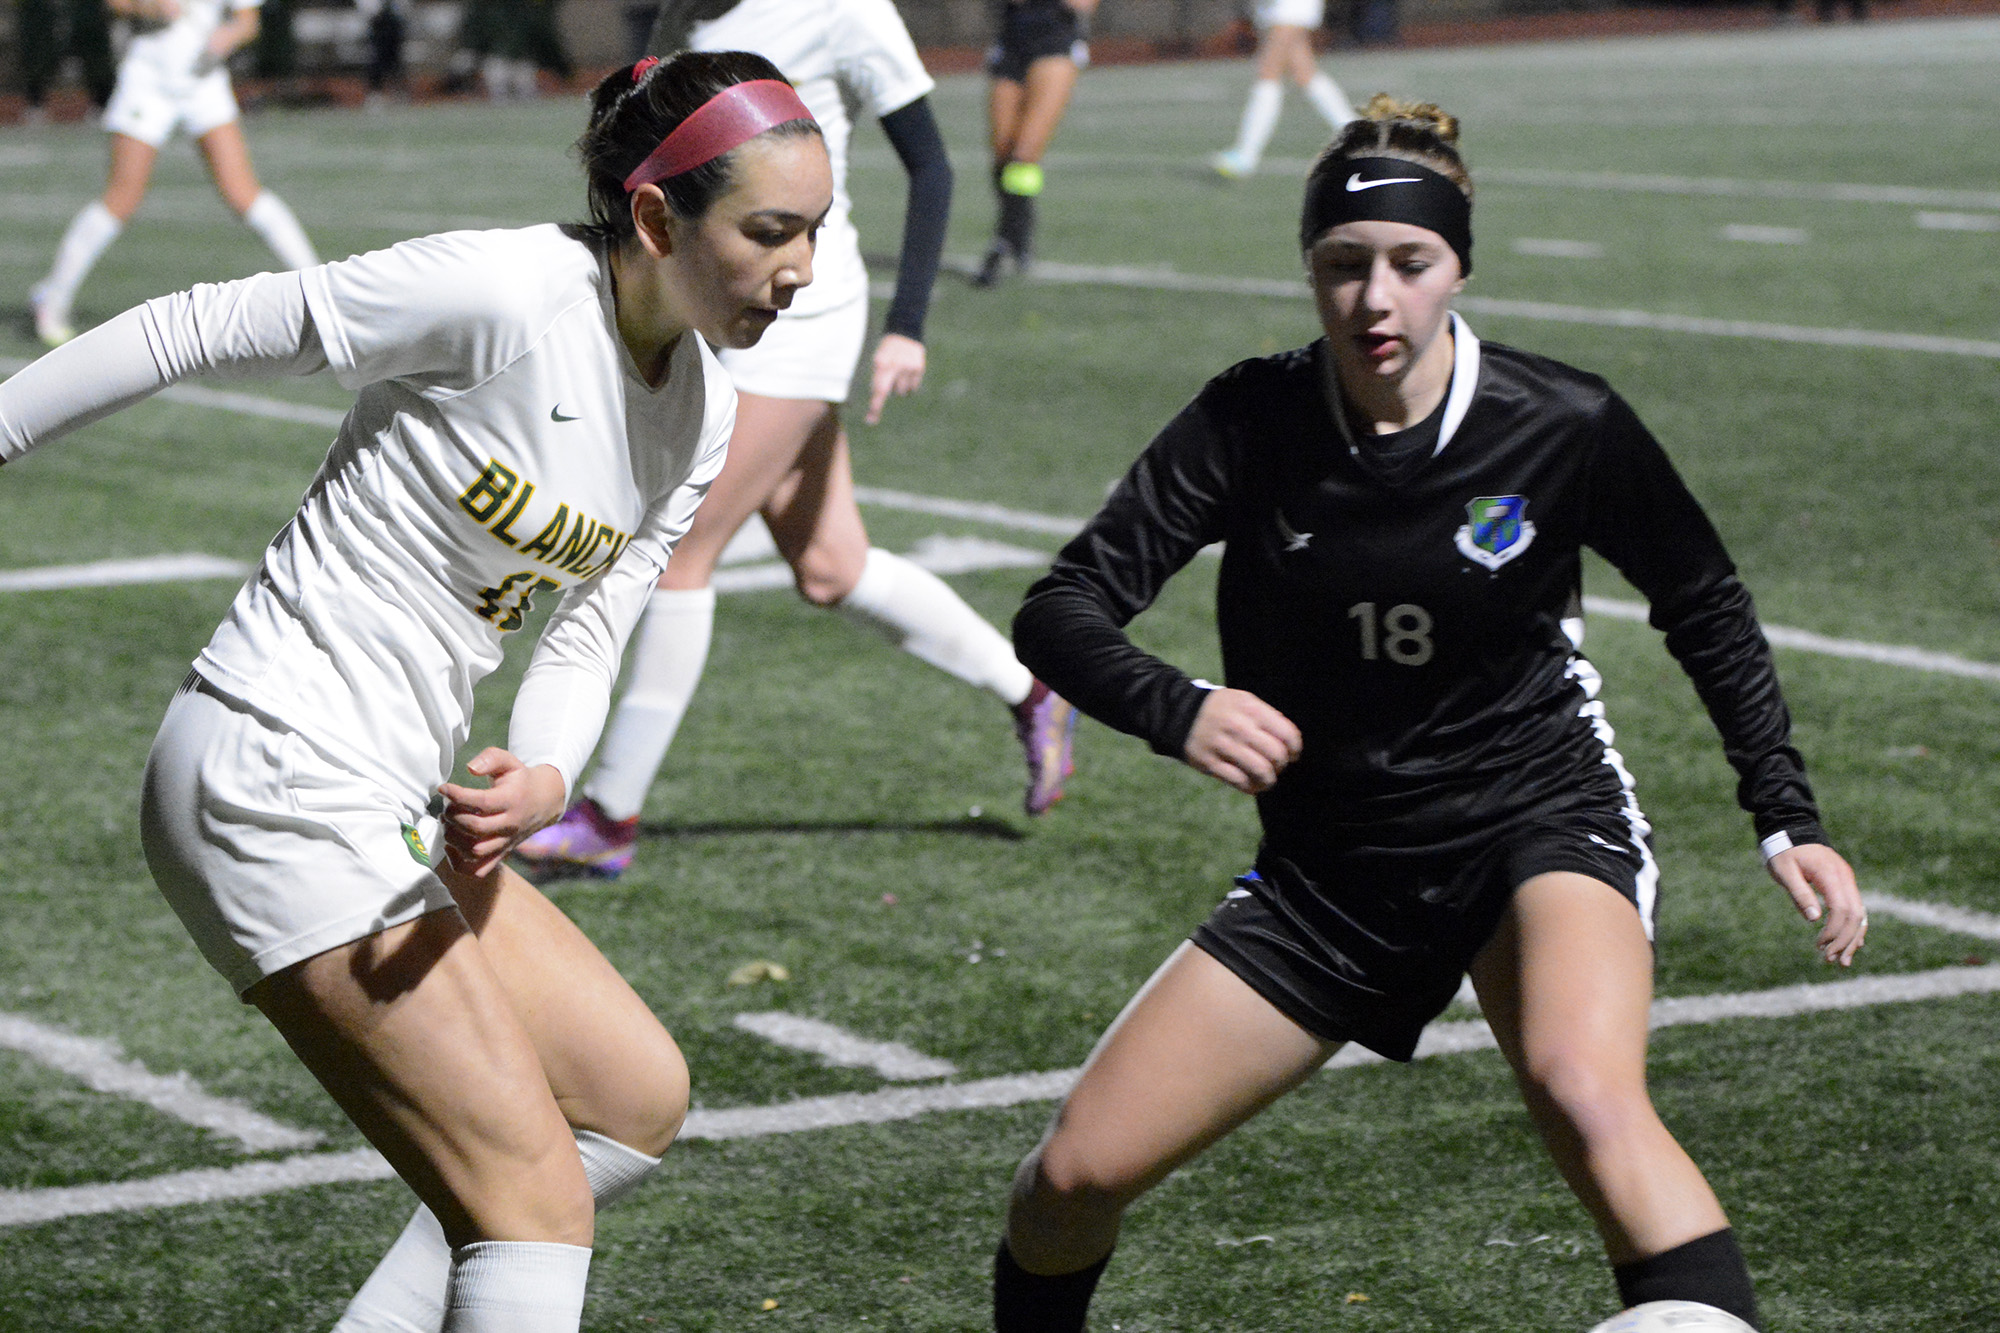 Bishop Blanchet's Kaya Hanson (left) and Mountain View's Teaghan Irvin battle for possession of the ball during a Class 3A girls soccer state round-of-20 match at McKenzie Stadium on Tuesday, Nov. 8, 2022.